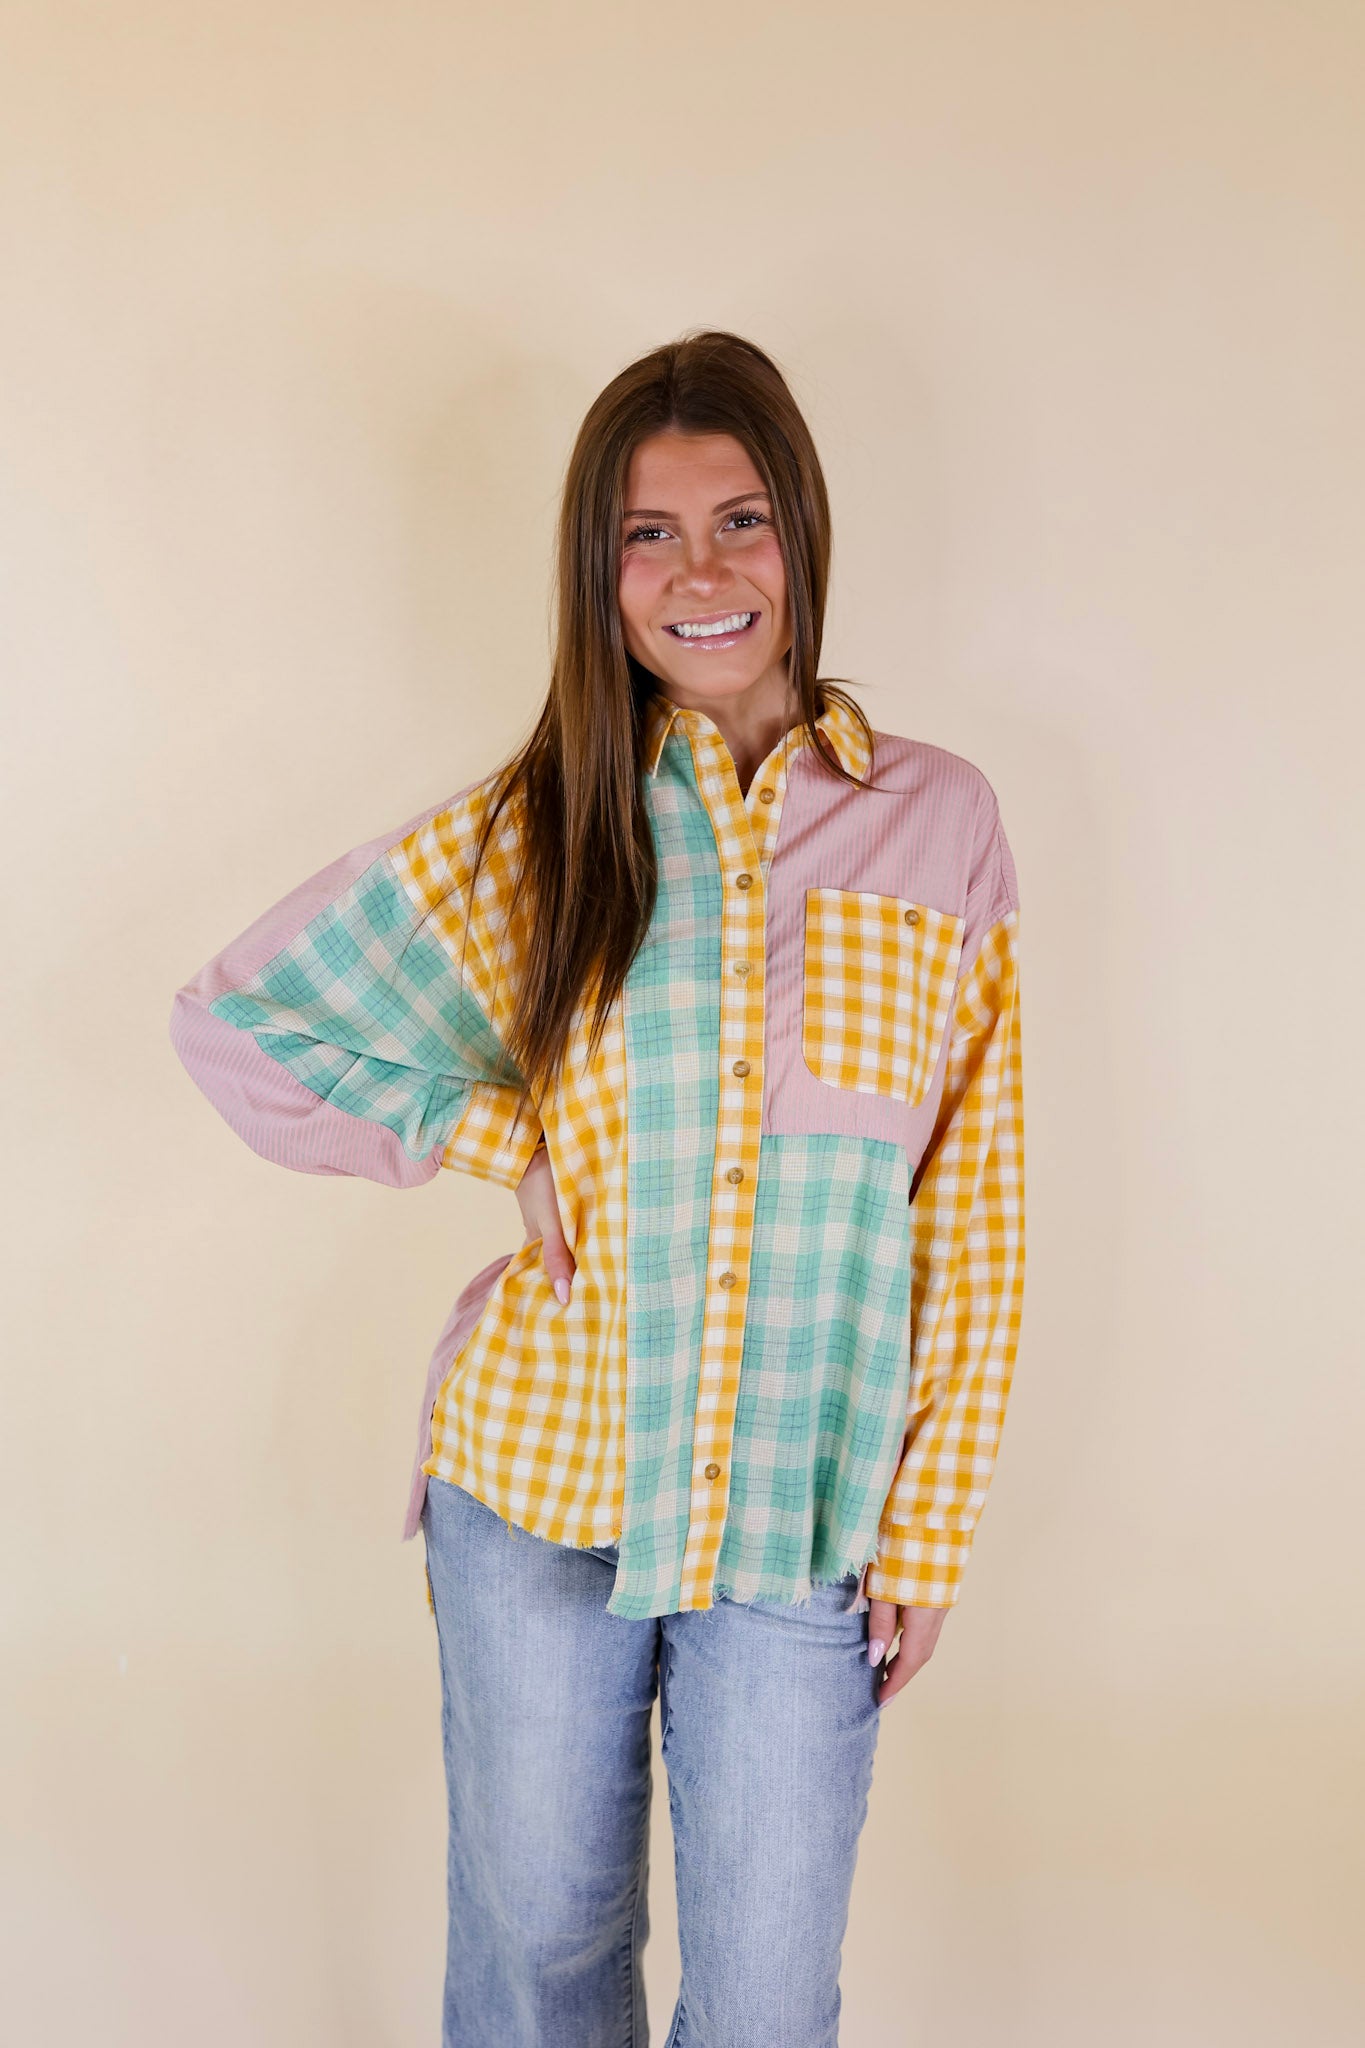 Sandy Shore Plaid Print Block Button Up Top with Raw Hem in Mustard Yellow Mix - Giddy Up Glamour Boutique